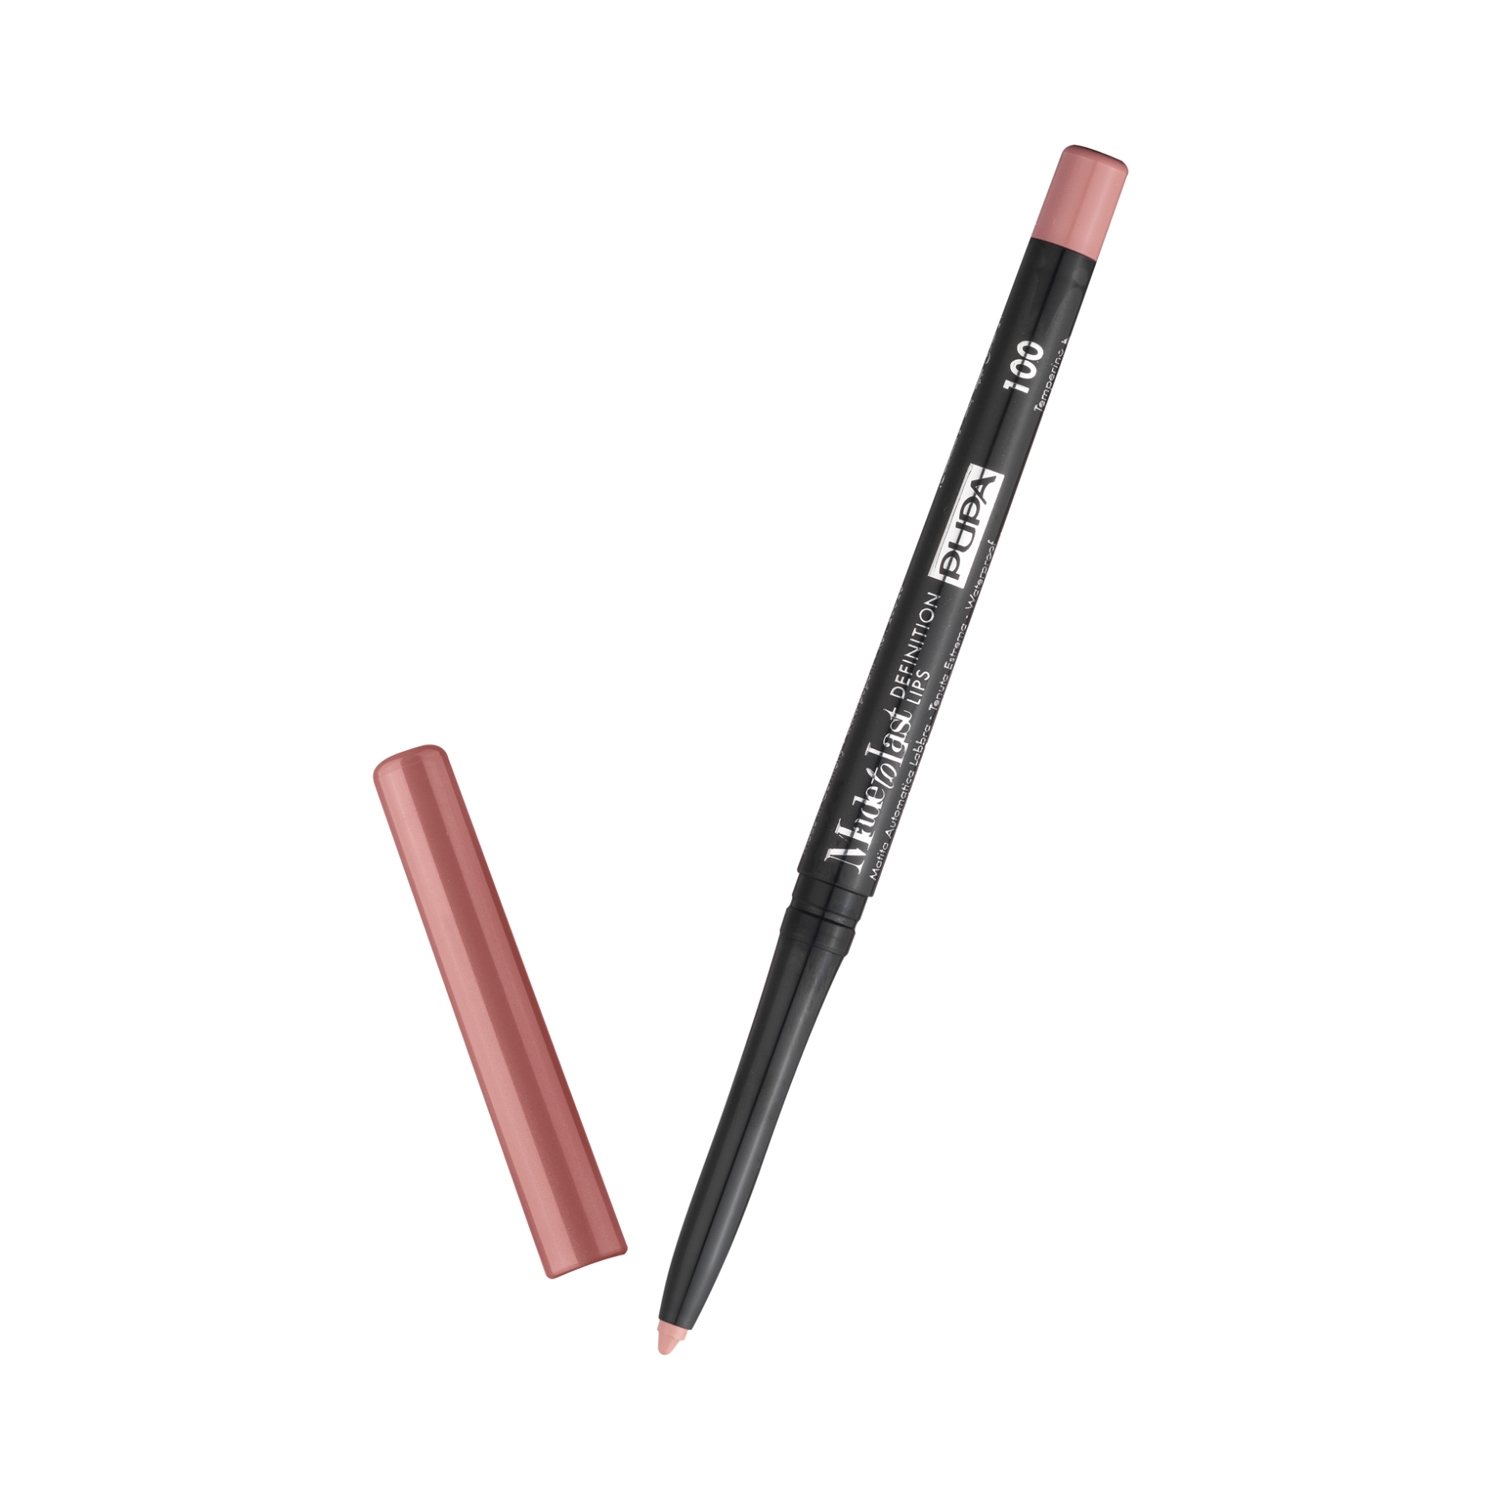 Pupa Milano Made To Last Definition Lip Pencil - 100 Absolute Nude (0.35g)